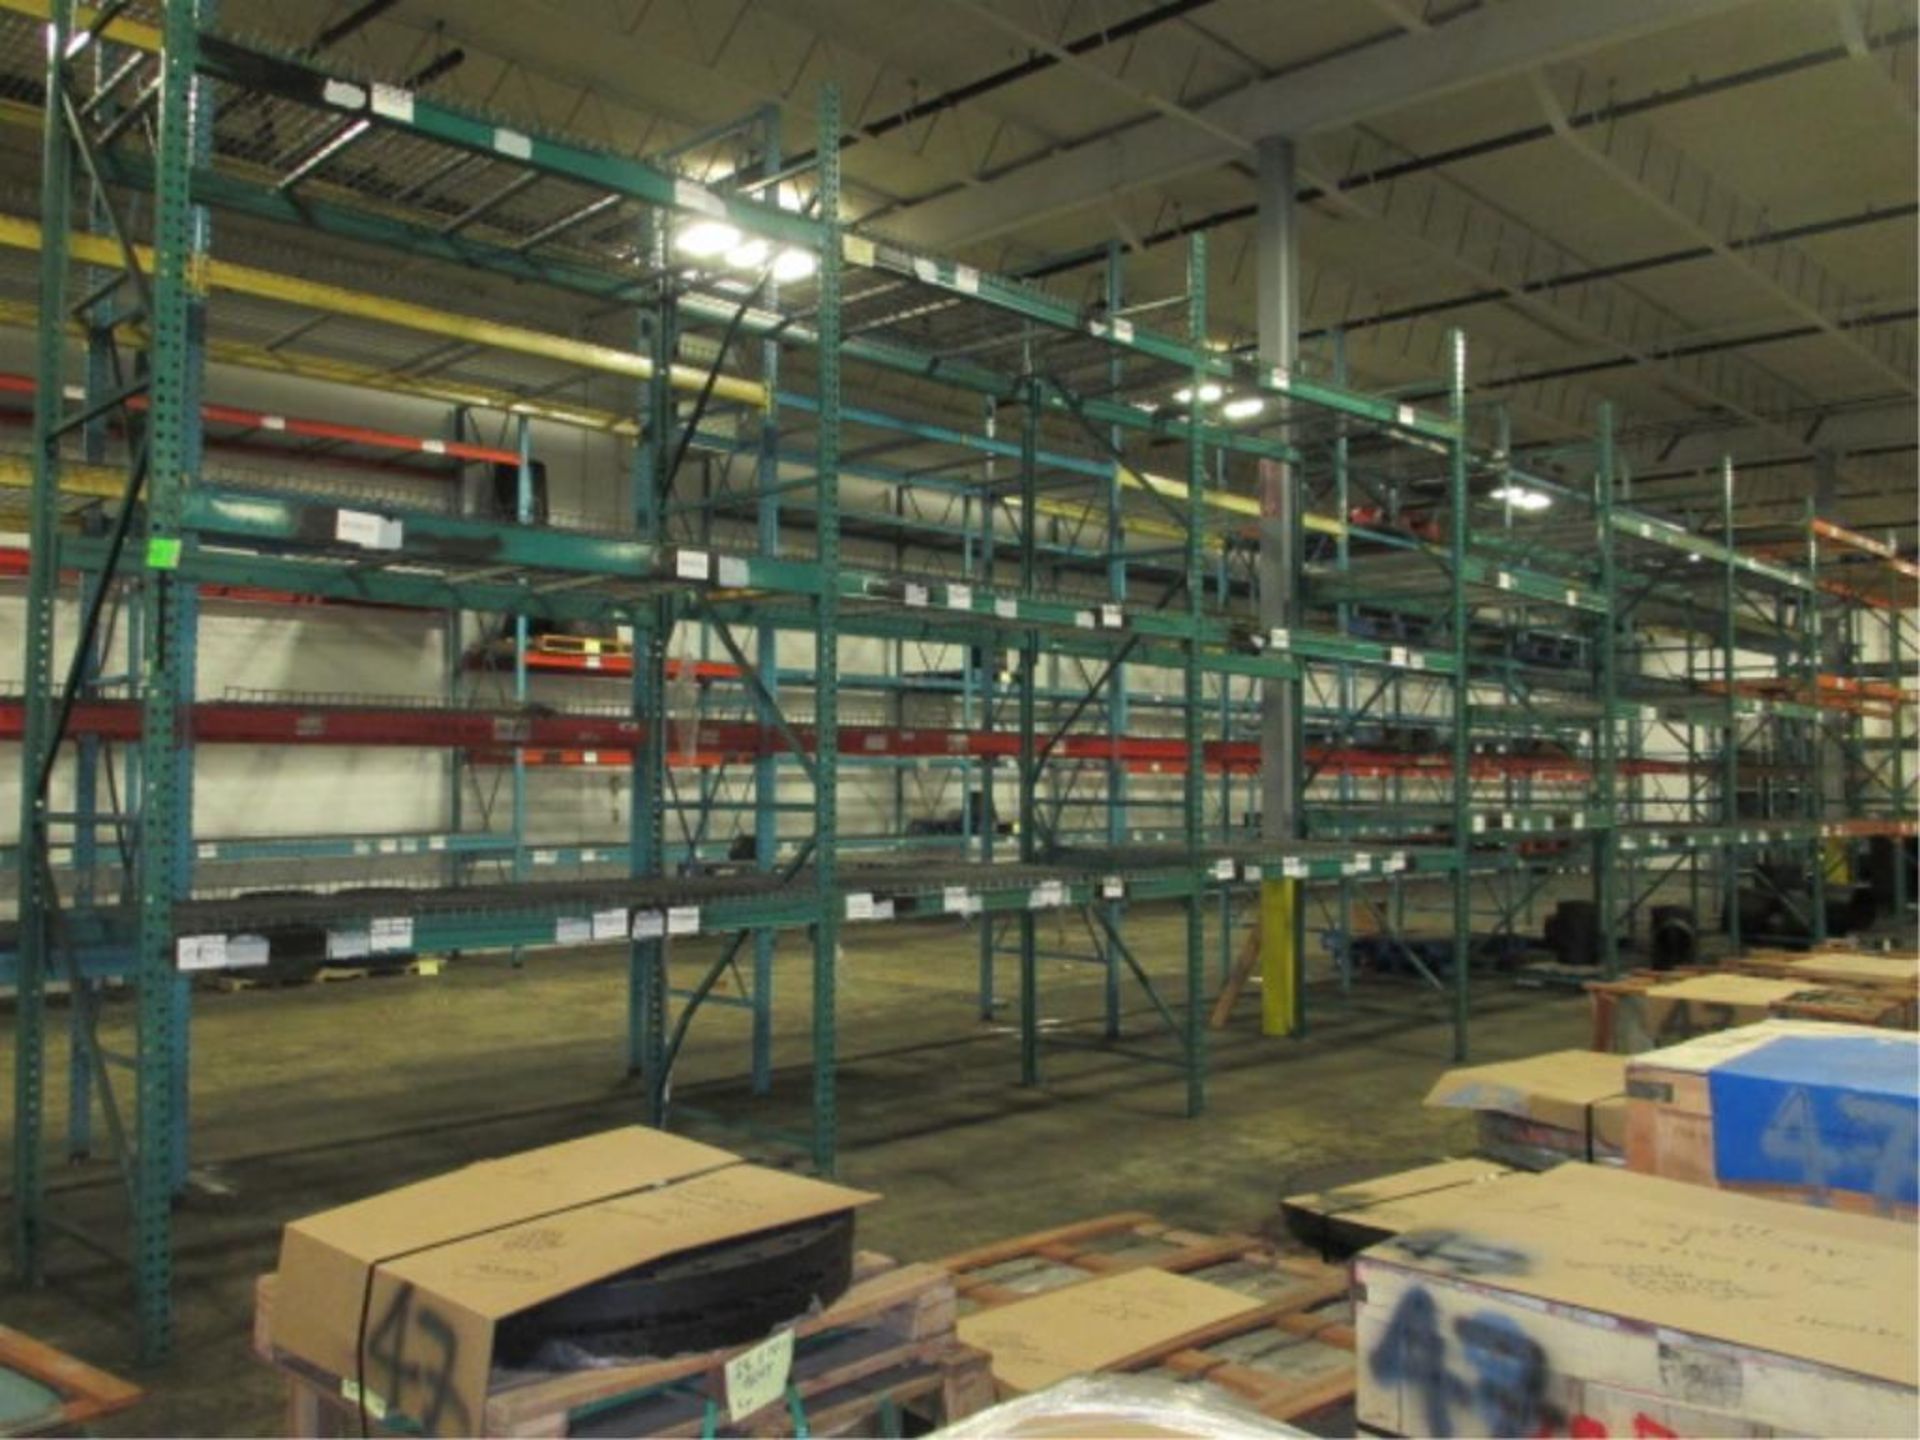 Lot: (3 Tier, 9 sections) Warehouse Pallet Racking, Keystone Style. Consisting of: (10) Upright